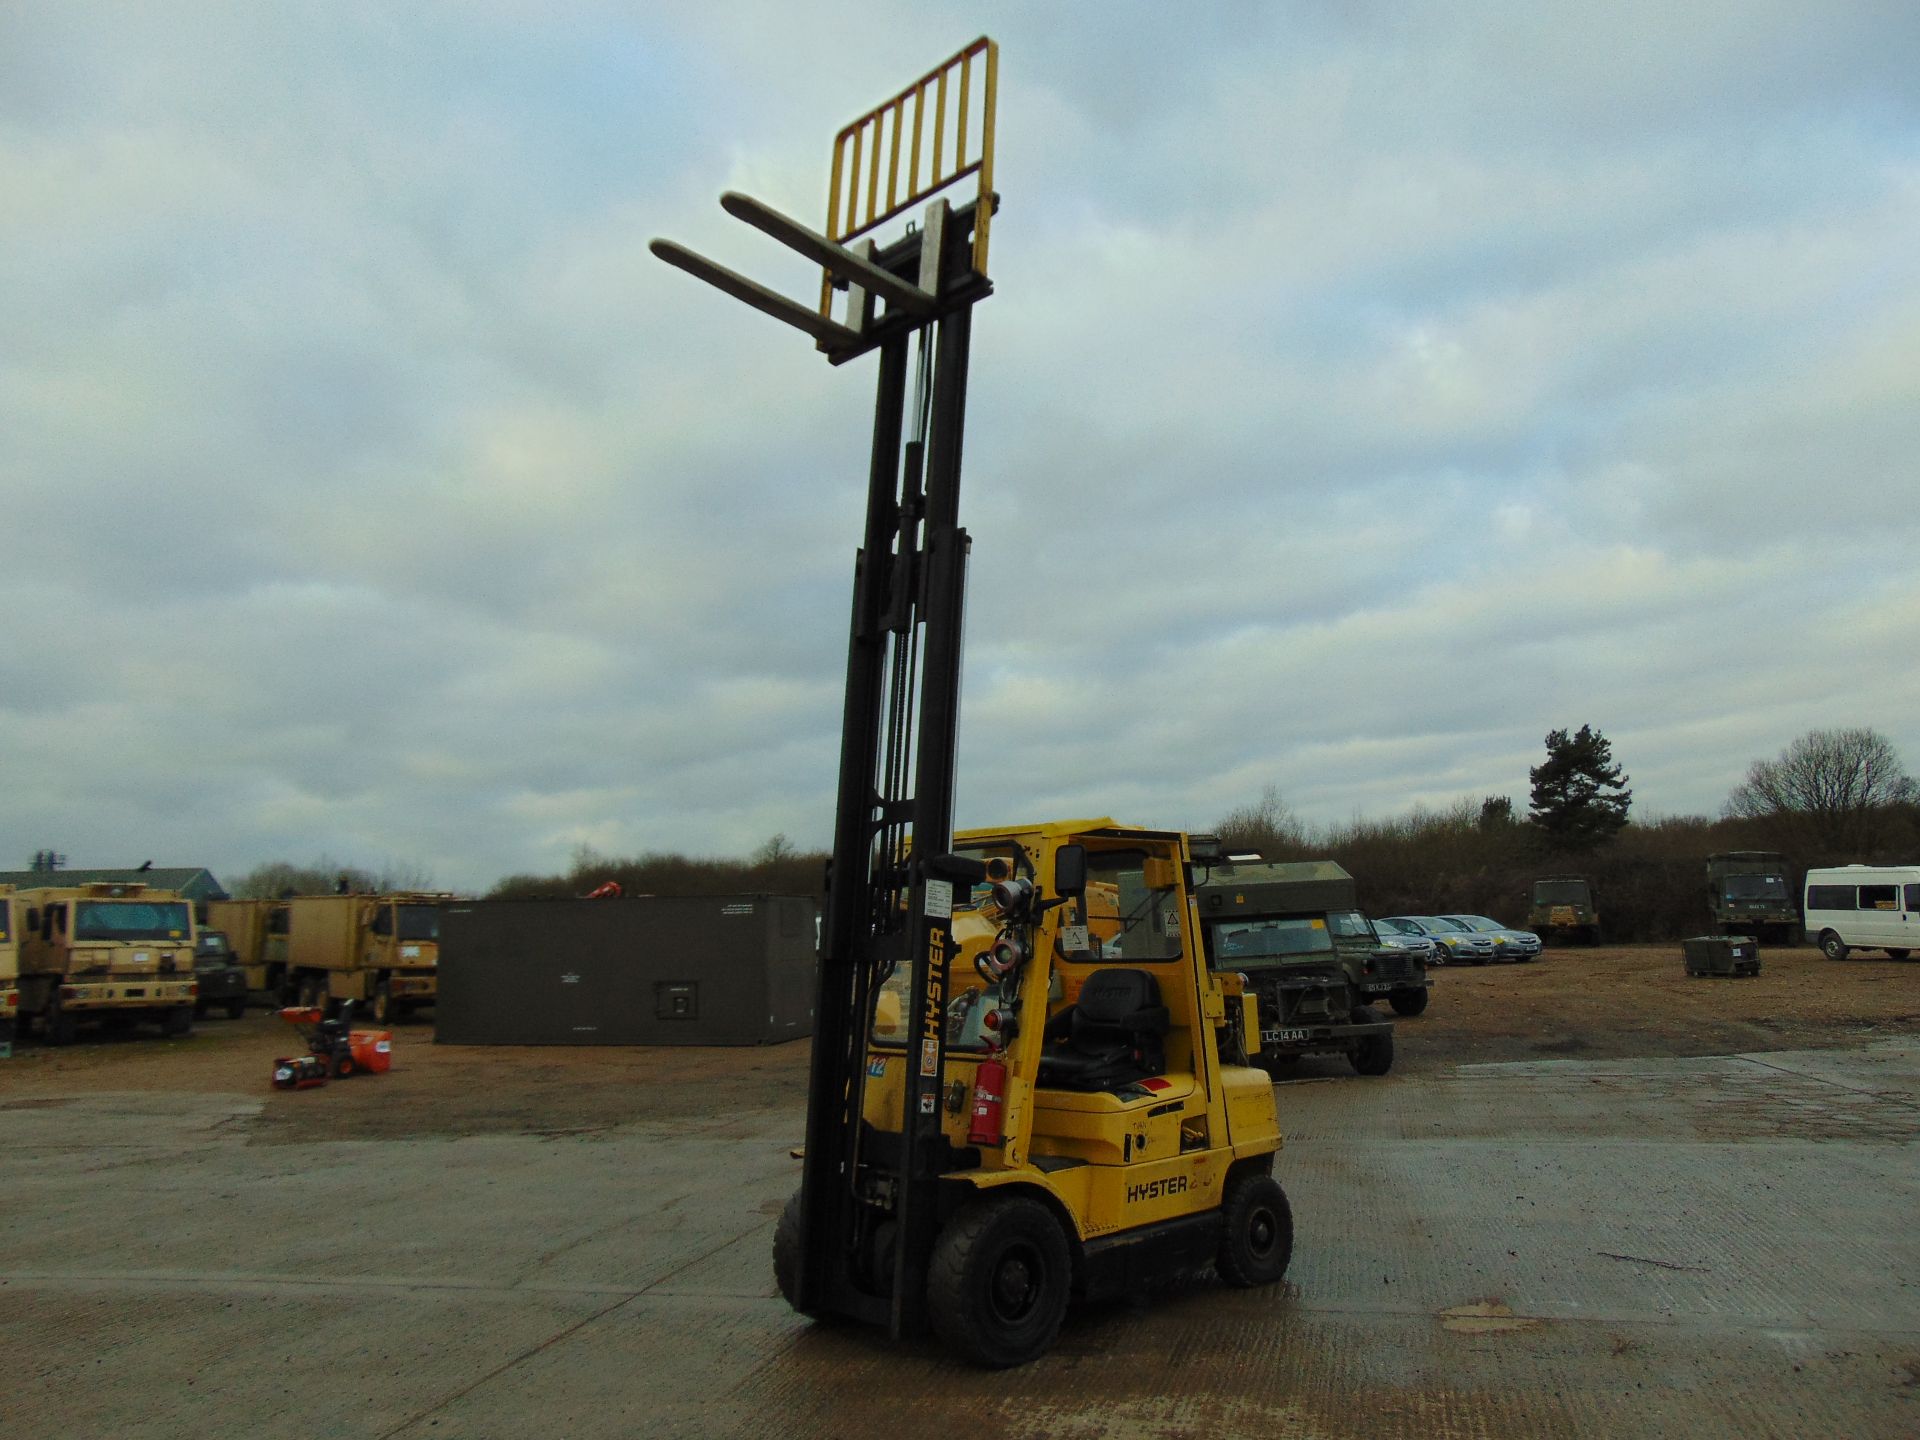 Hyster 2.50 Class C, Zone 2 Protected Diesel Forklift - Image 12 of 25